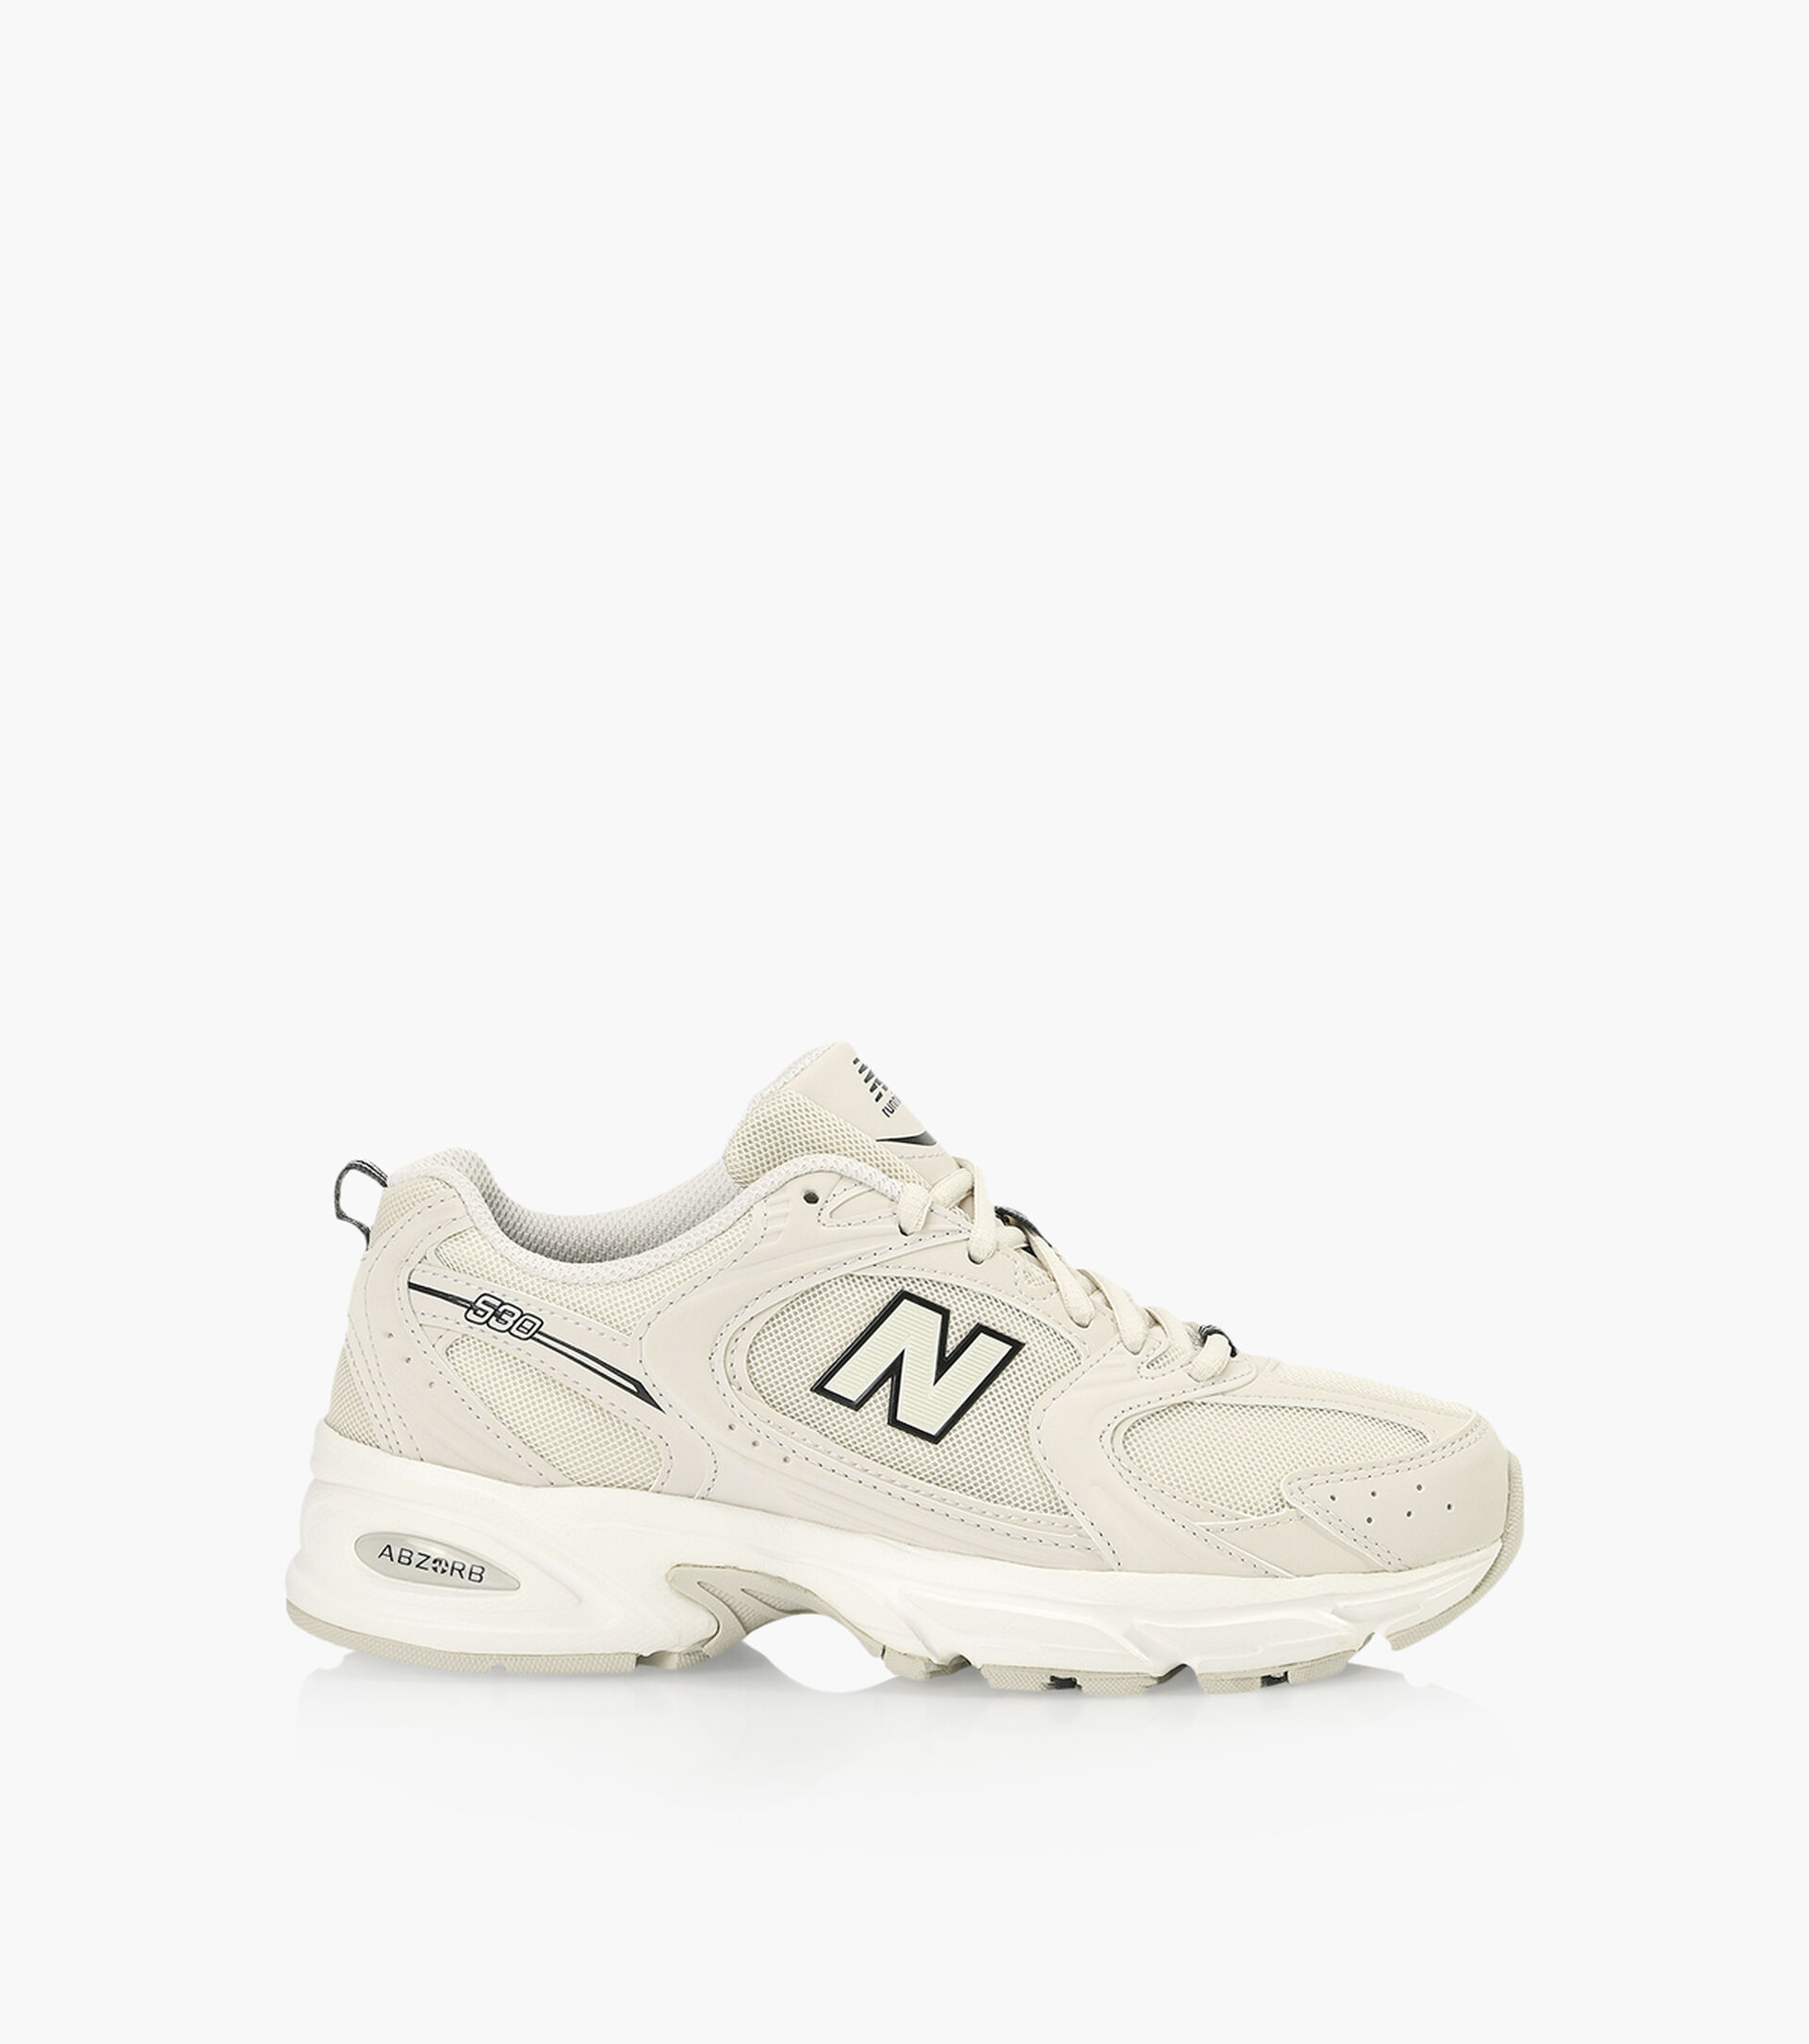 NEW BALANCE 530 - Beige Fabric | Browns Shoes